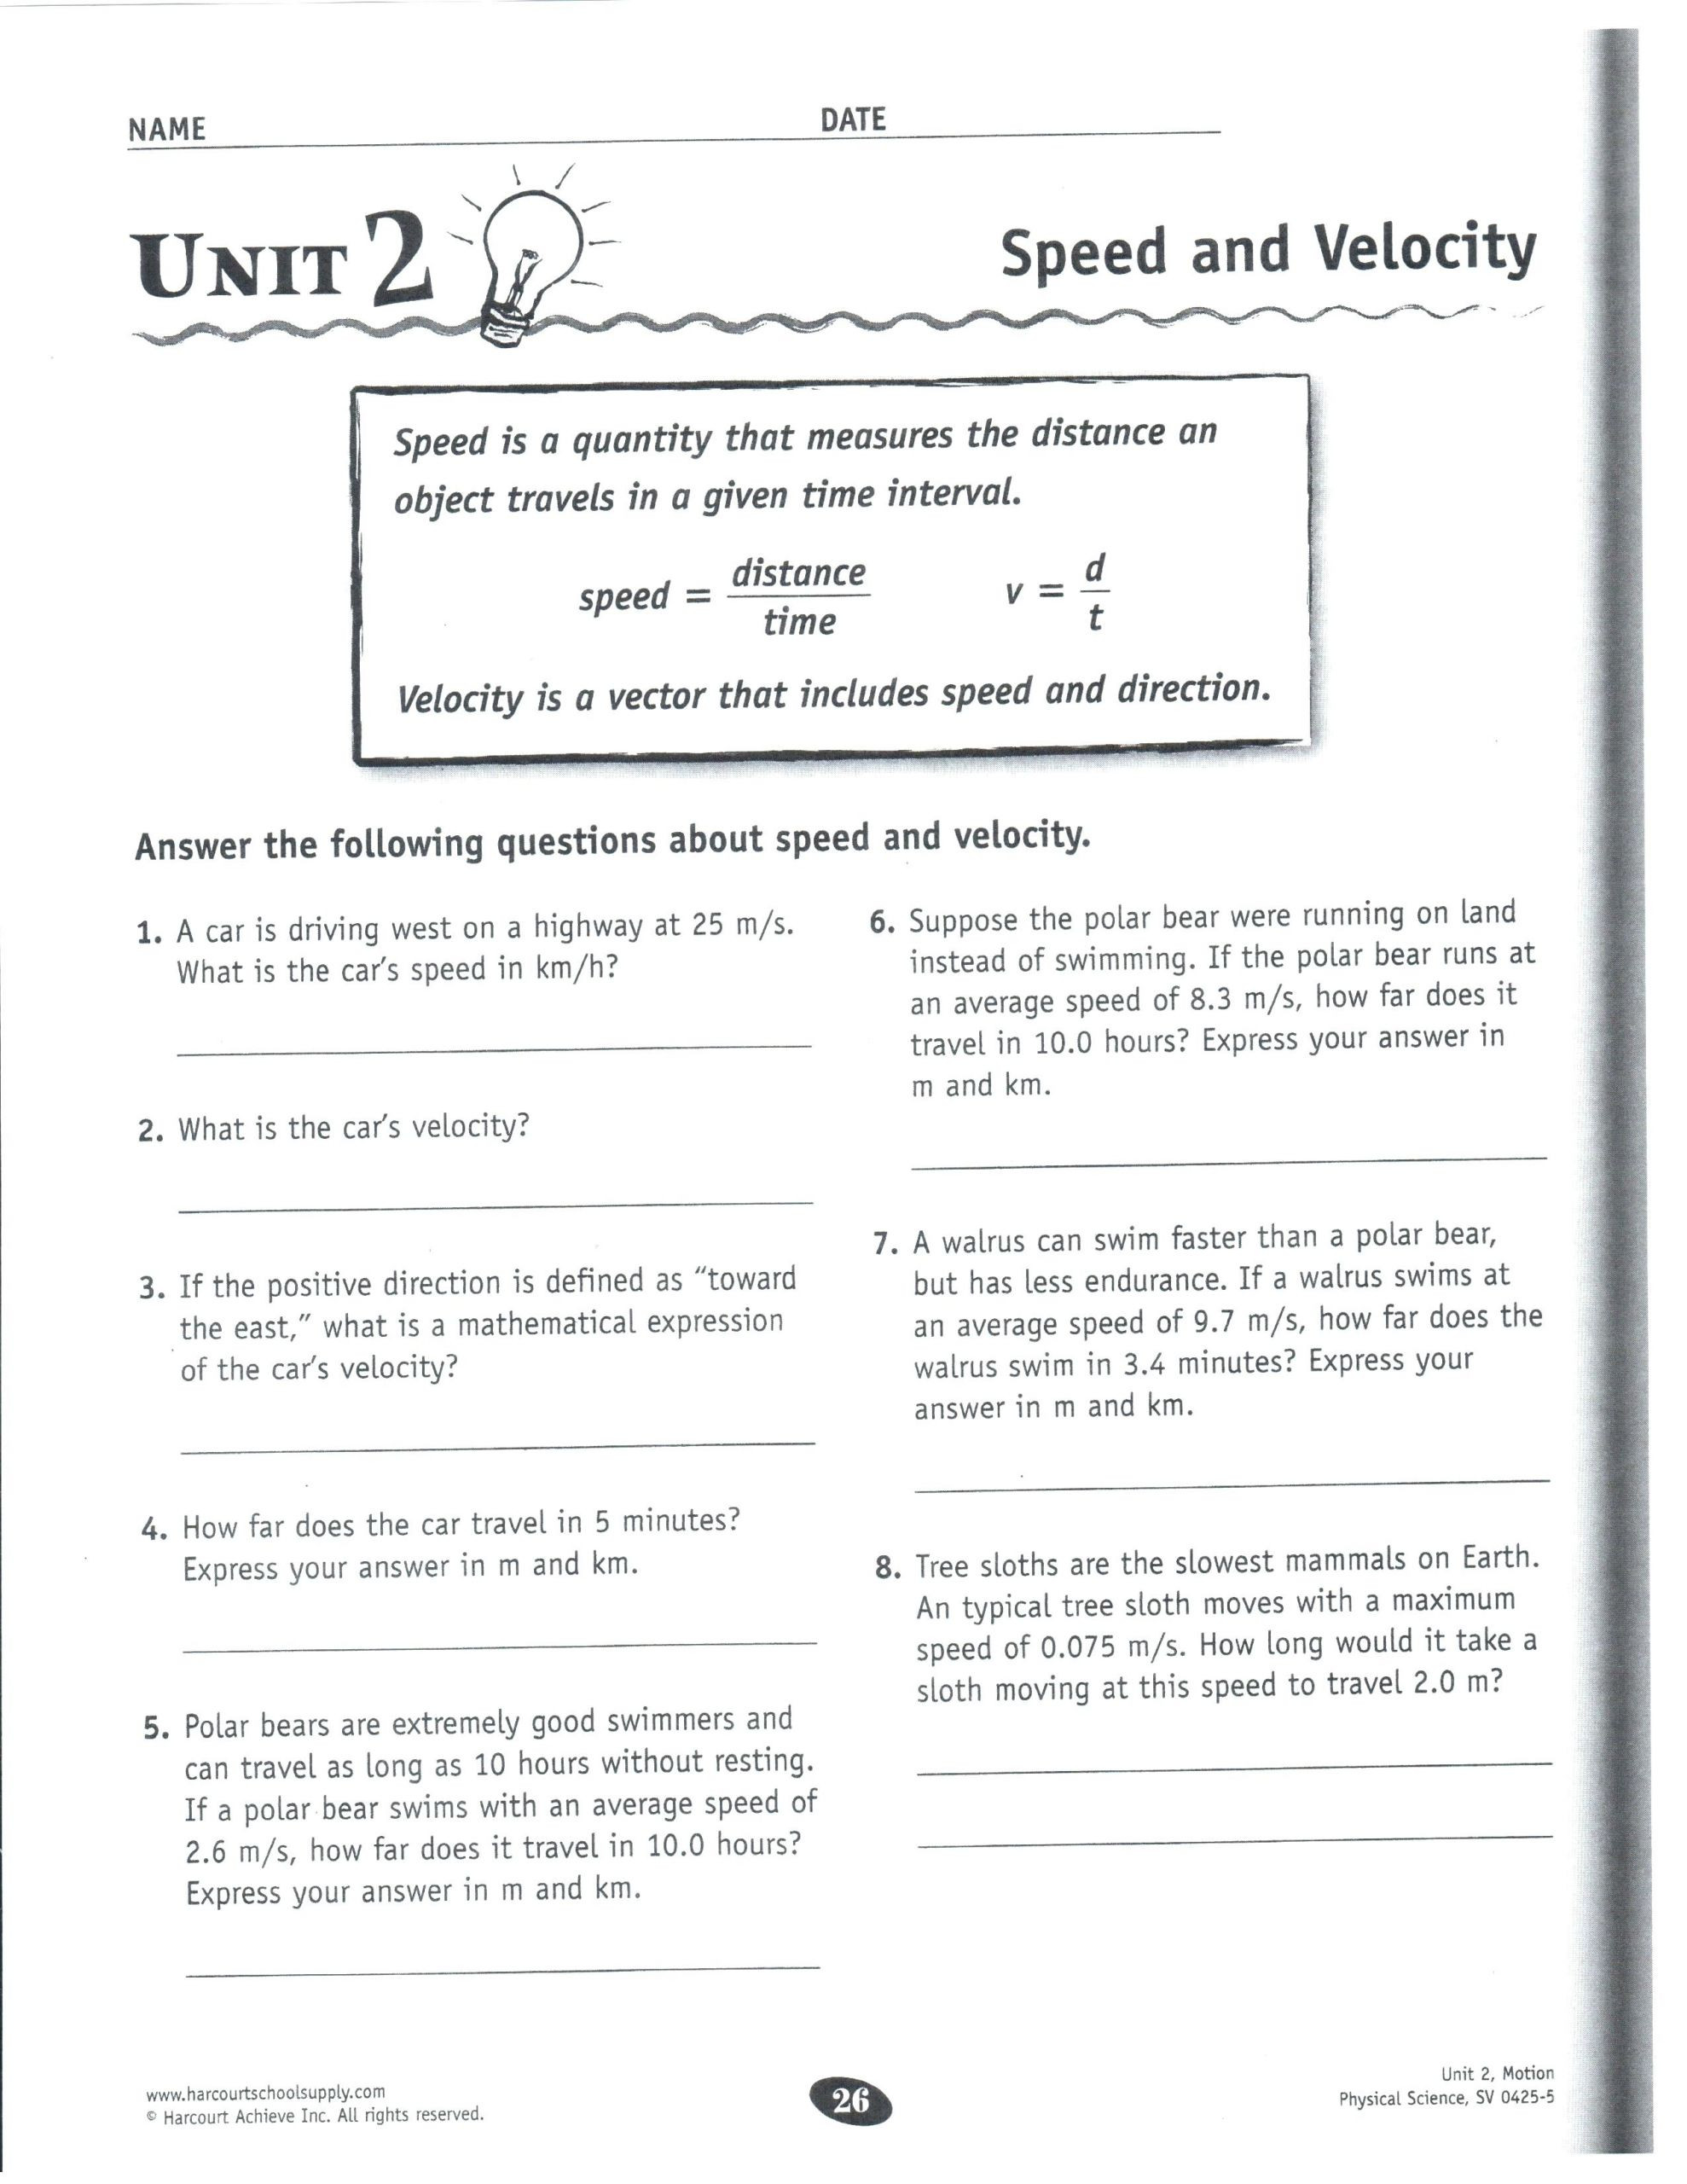 5th Grade Science Worksheets Science Worksheets for 5th Grade ÙÙ ÙØ³Ø¨Ù ÙÙ ÙØ ÙÙ Ø§ÙØµÙØ±